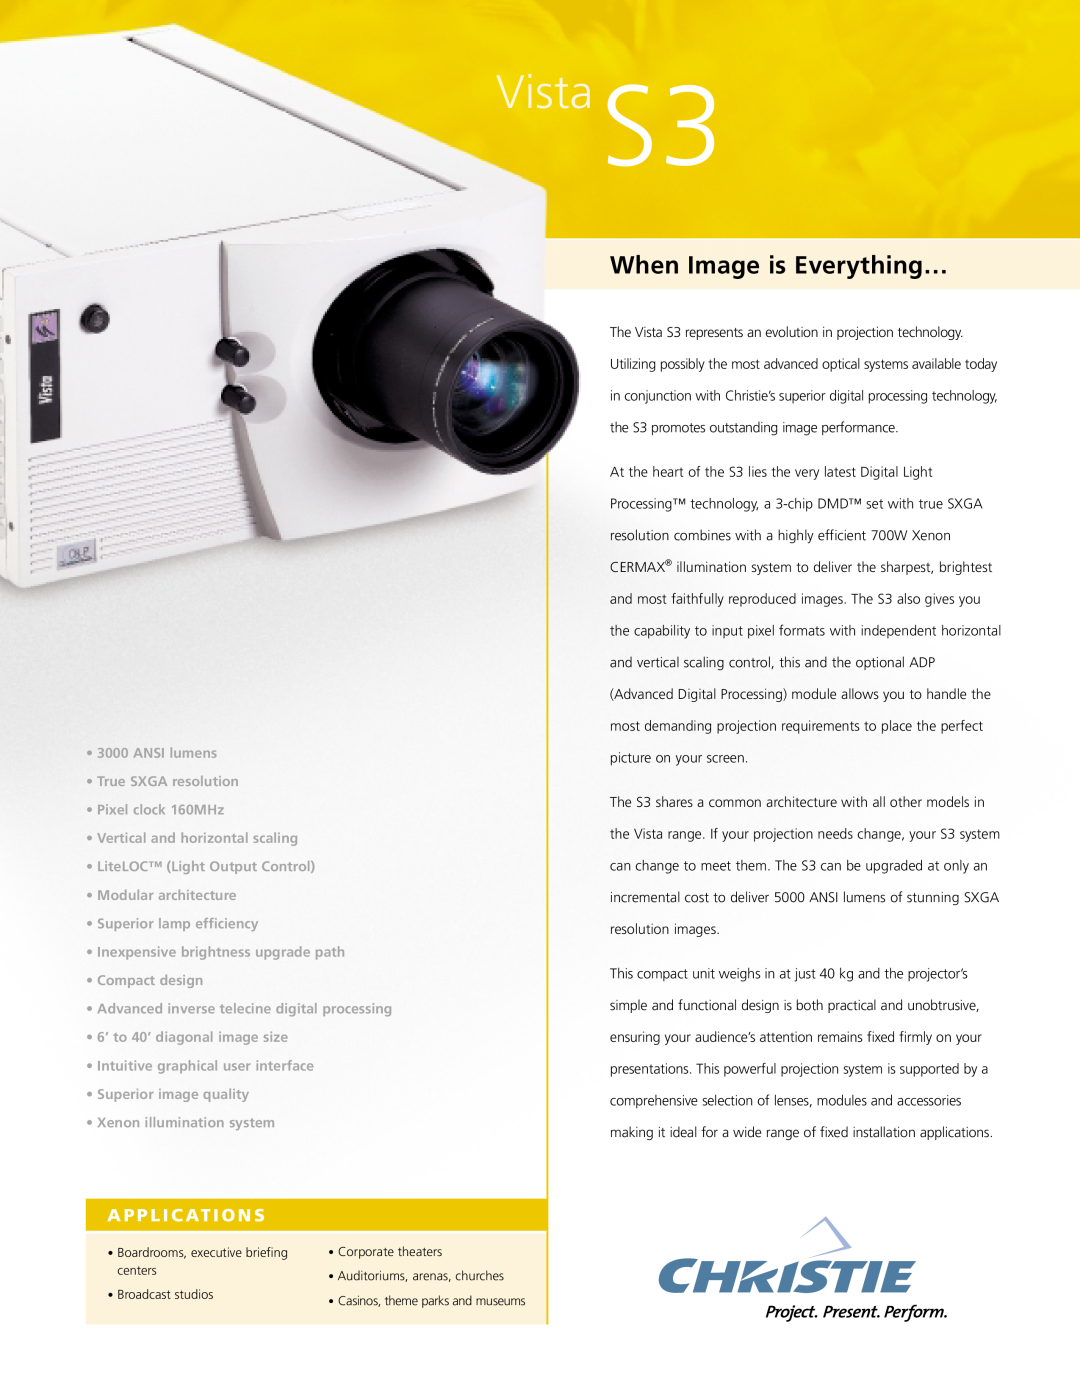 Christie Digital Systems manual A P P L I C At I O N S, Vista S3, When Image is Everything… 